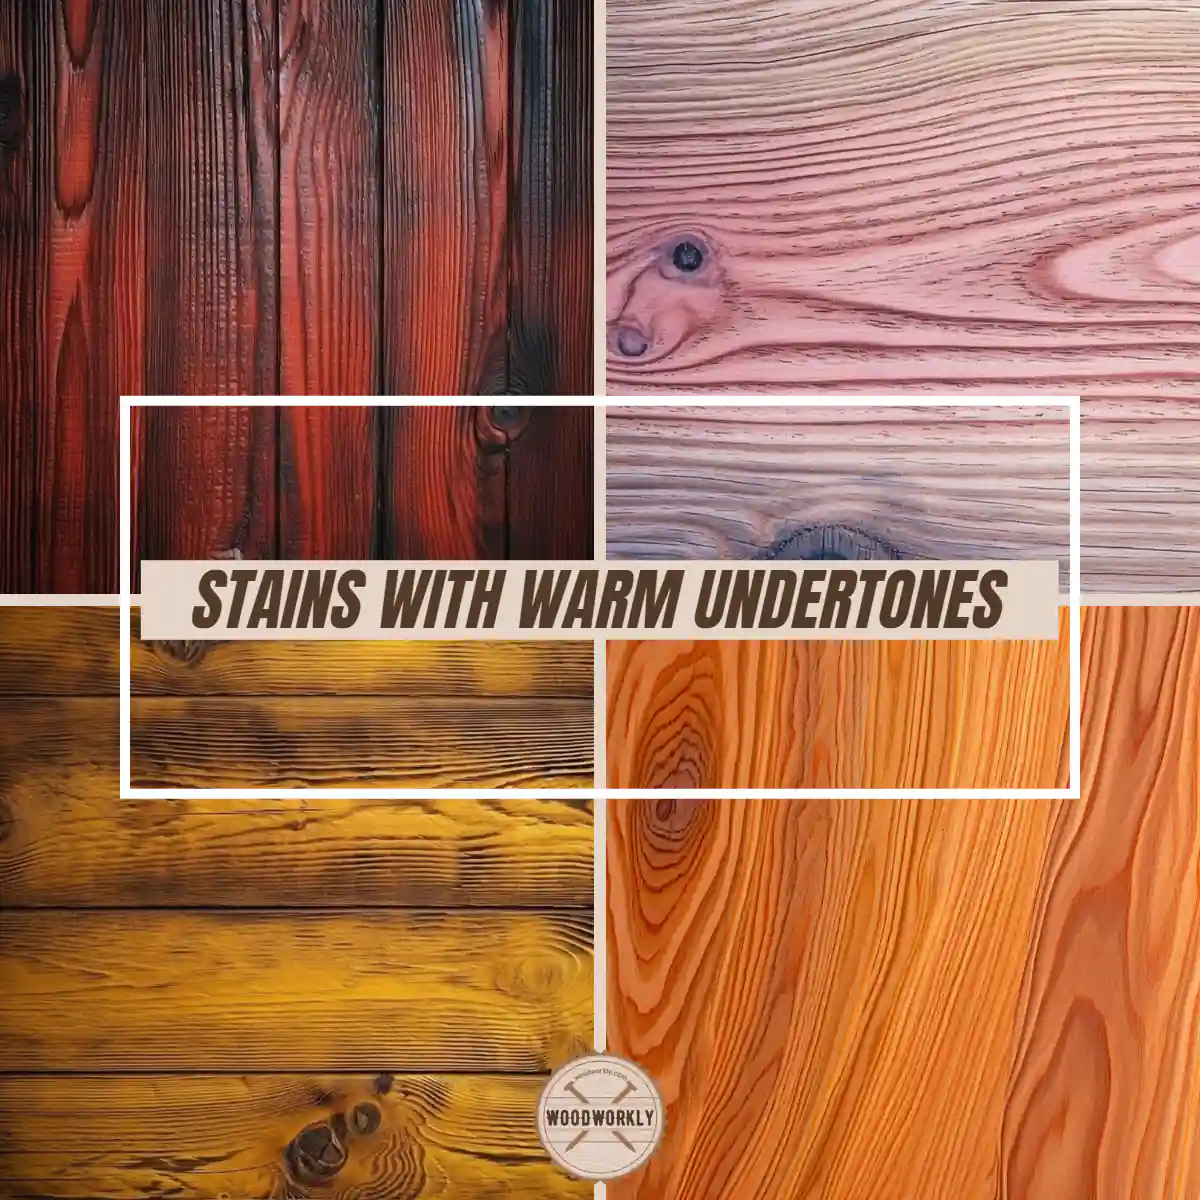 Stains with warm undertones